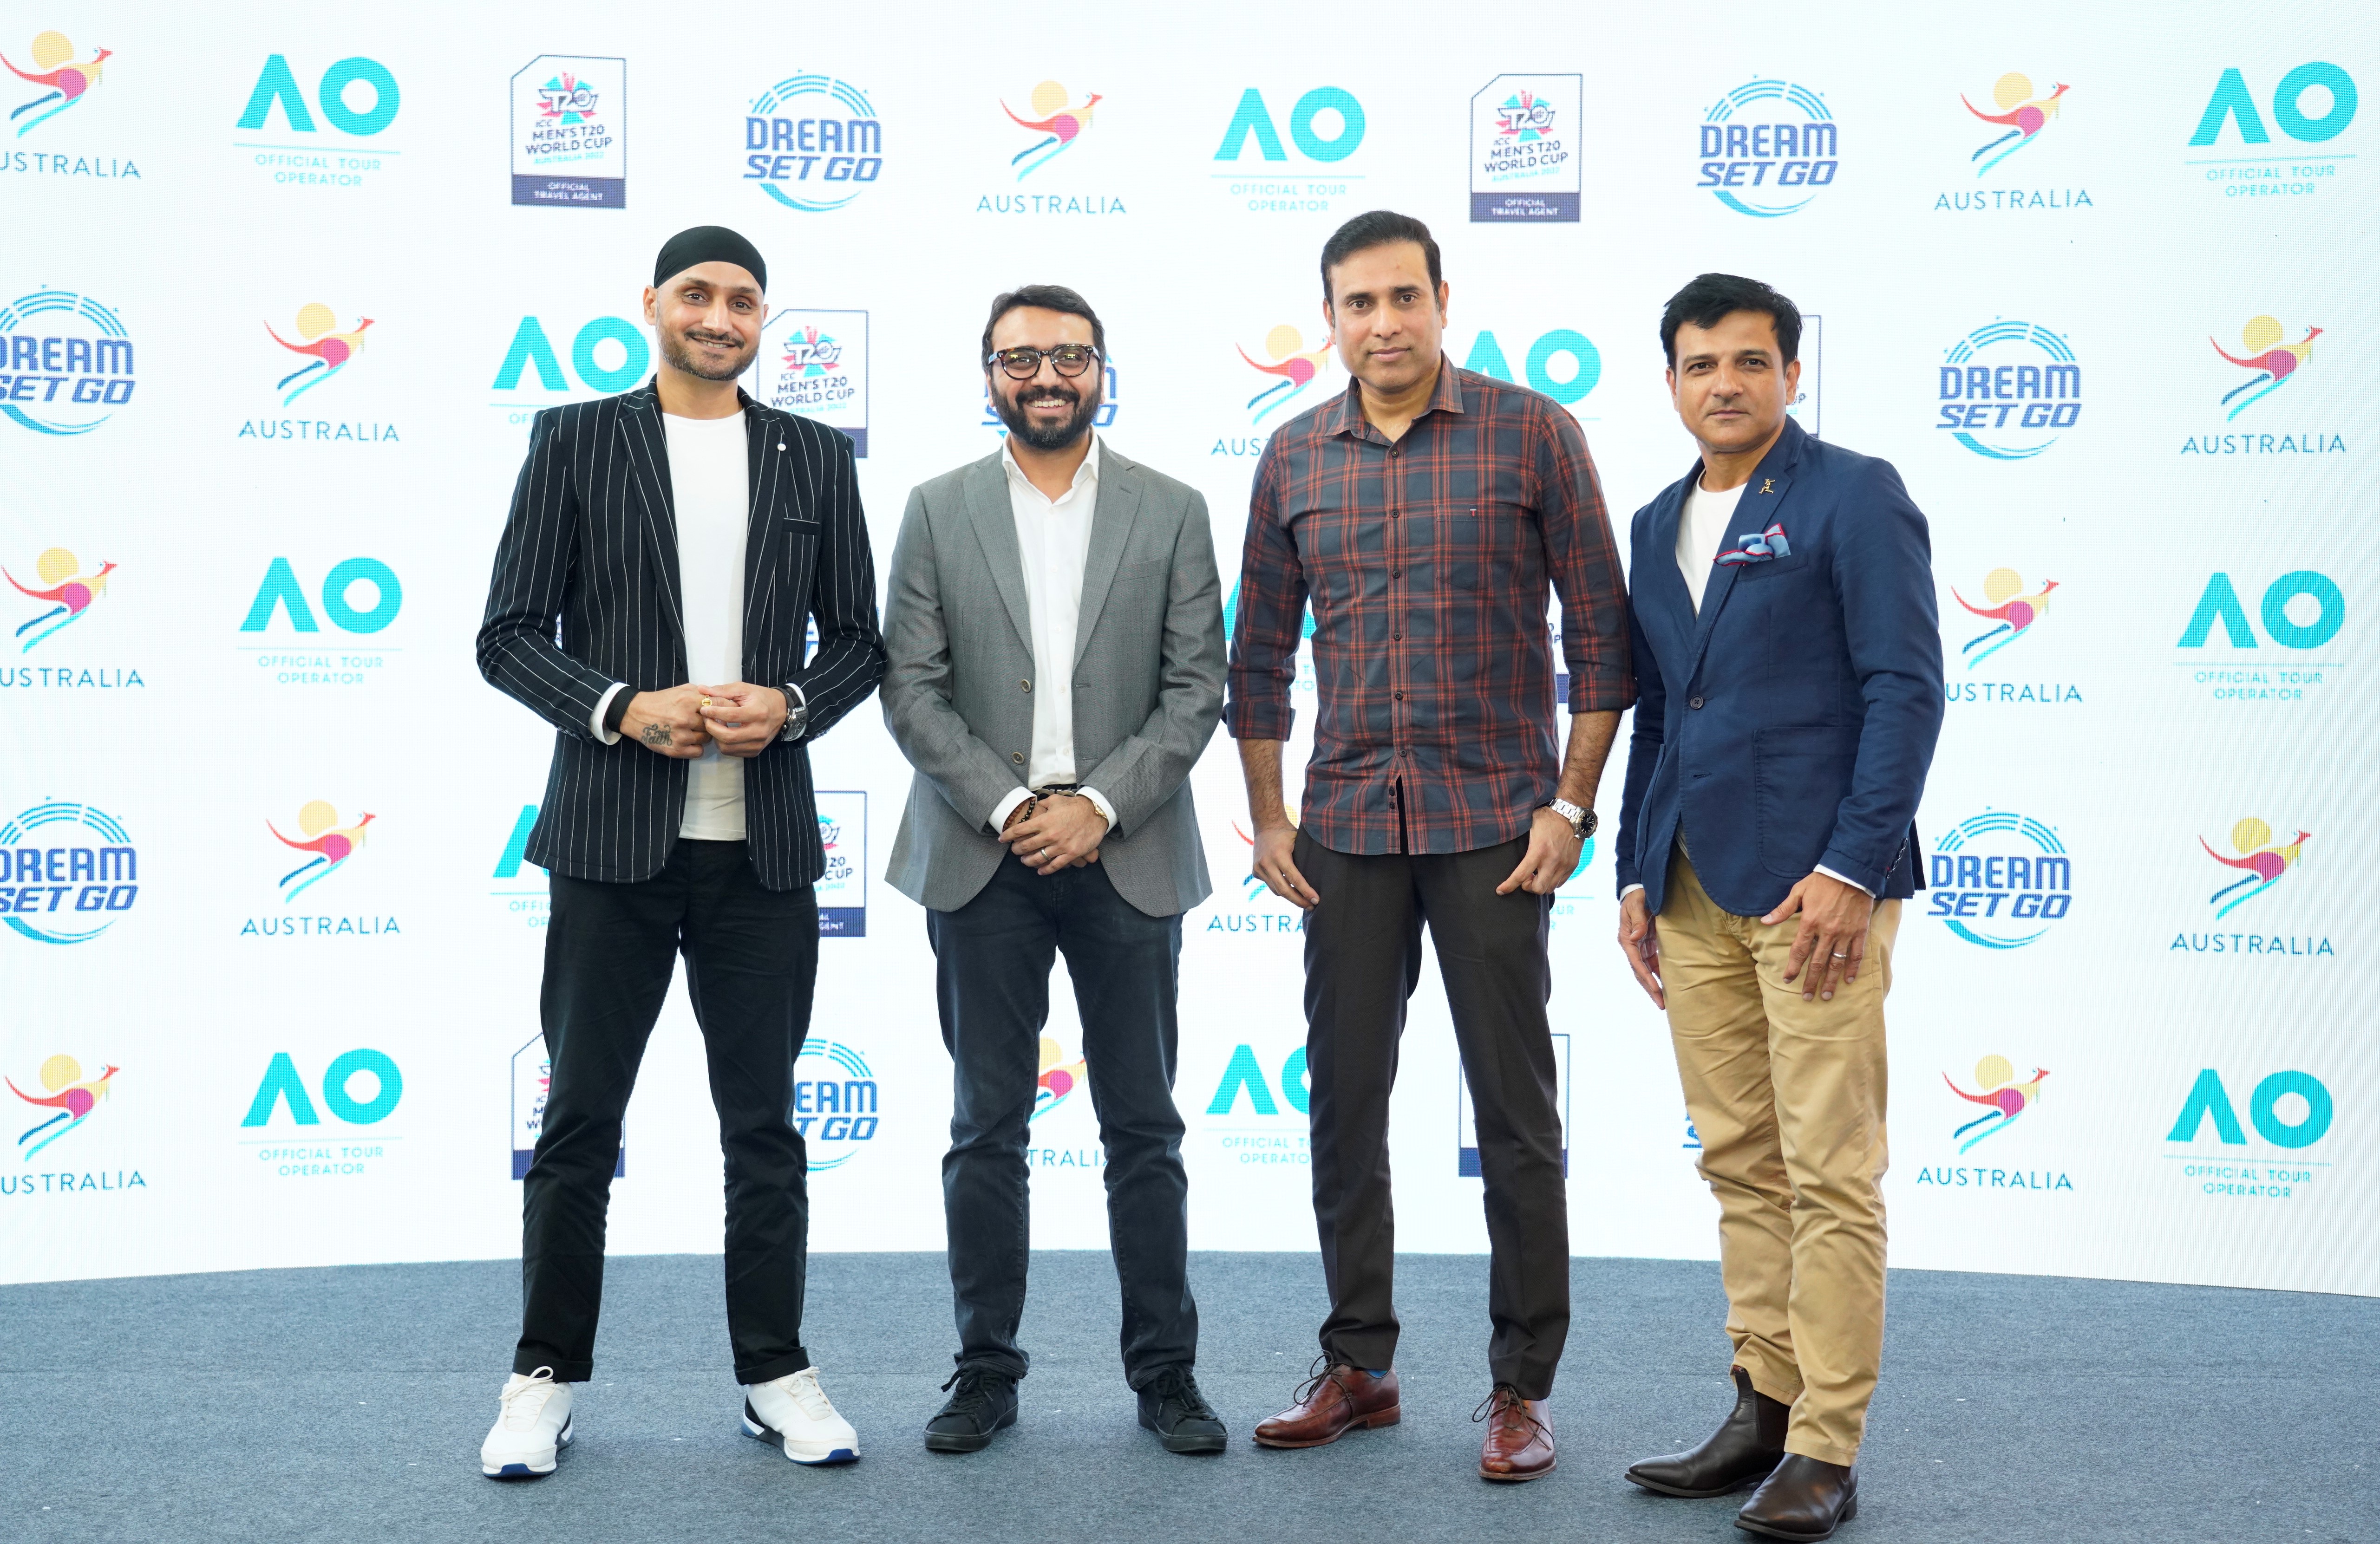 T20 World Cup: DreamSetGo partners with Harbhajan Singh and VVS Laxman to launch travel packages for ICC Men’s T20 World Cup Australia 2022 and Australian Open 2023